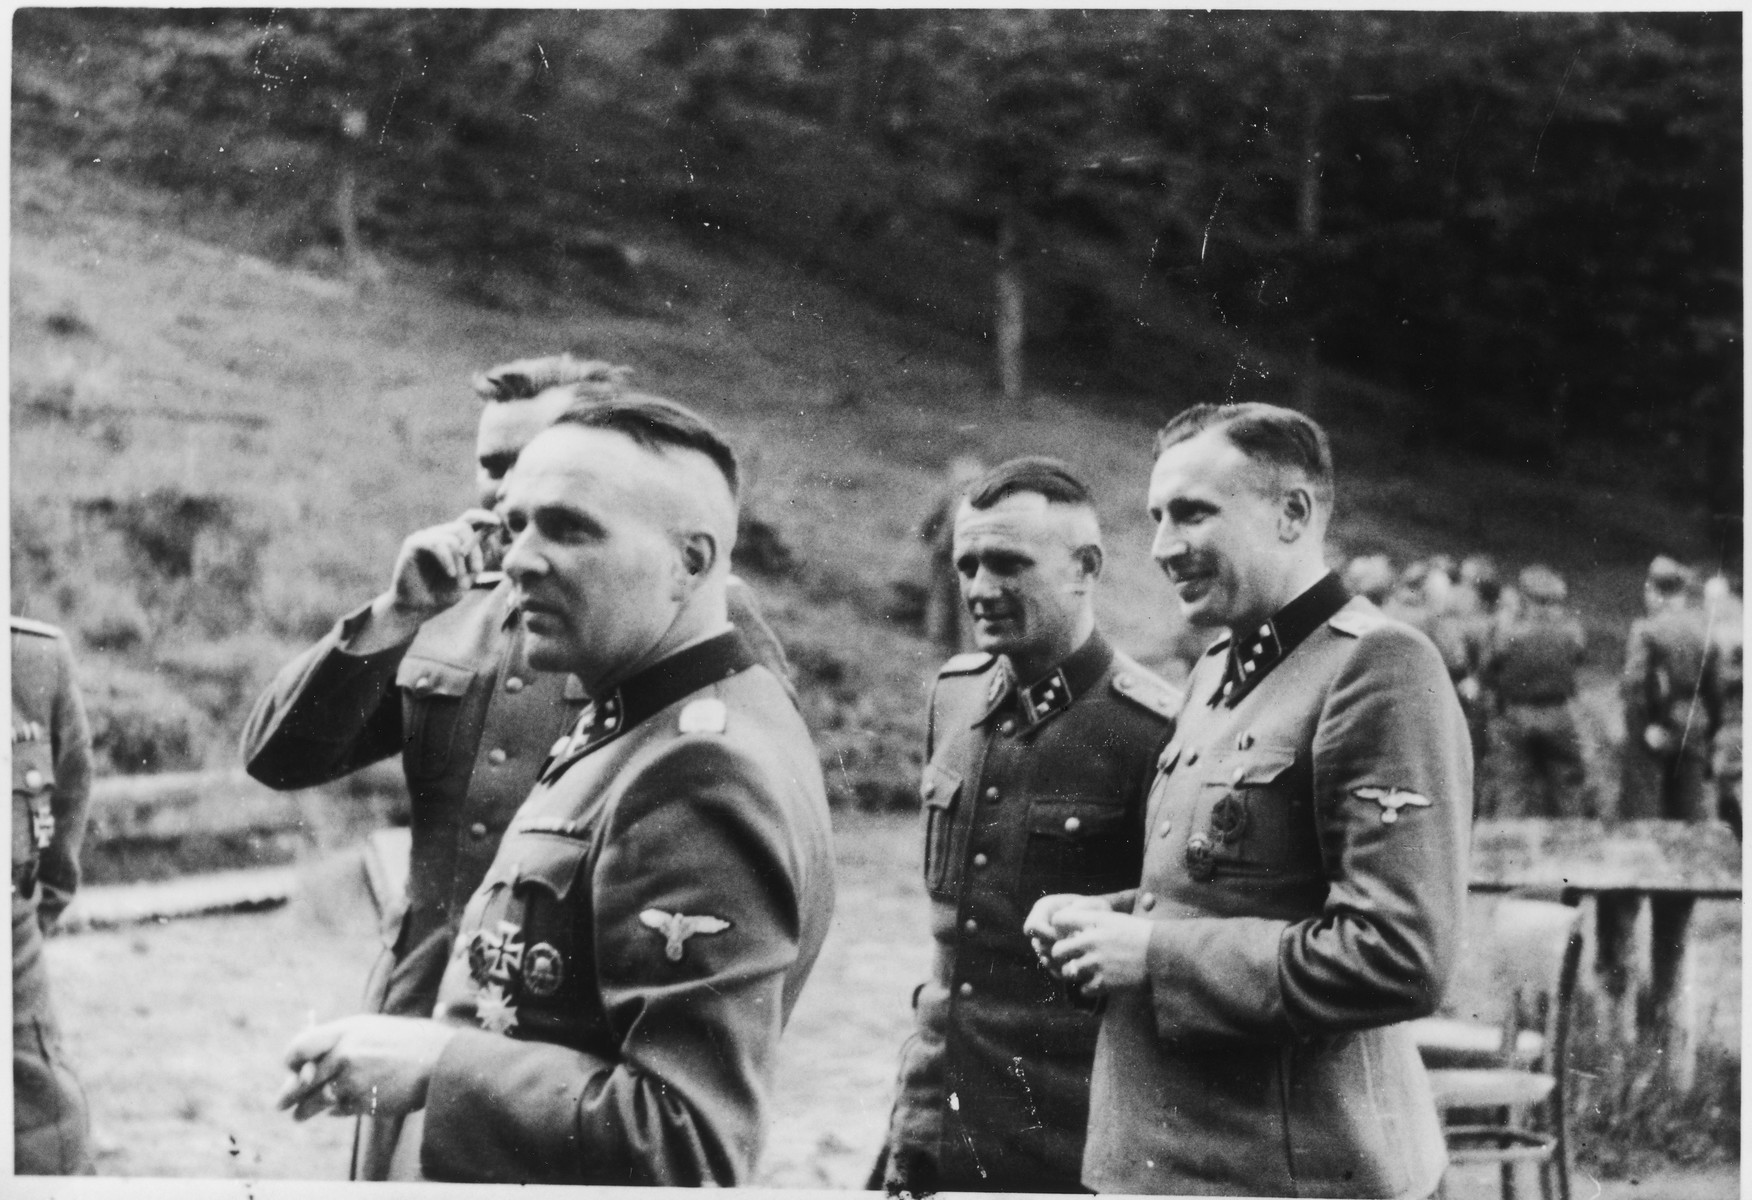 SS officers socialize on the grounds of the SS retreat Solahuette outside of Auschwitz. 

From left to right they are: Rudolf Hoess, Josef Kramer (partially obscured behind him), Anton Thumann and Karl Hoecker.

[Based on the officers visiting Solahutte, we surmise that the photographs were taken to honor Rudolf Hoess who completed his tenure as garrison senior on July 29.]